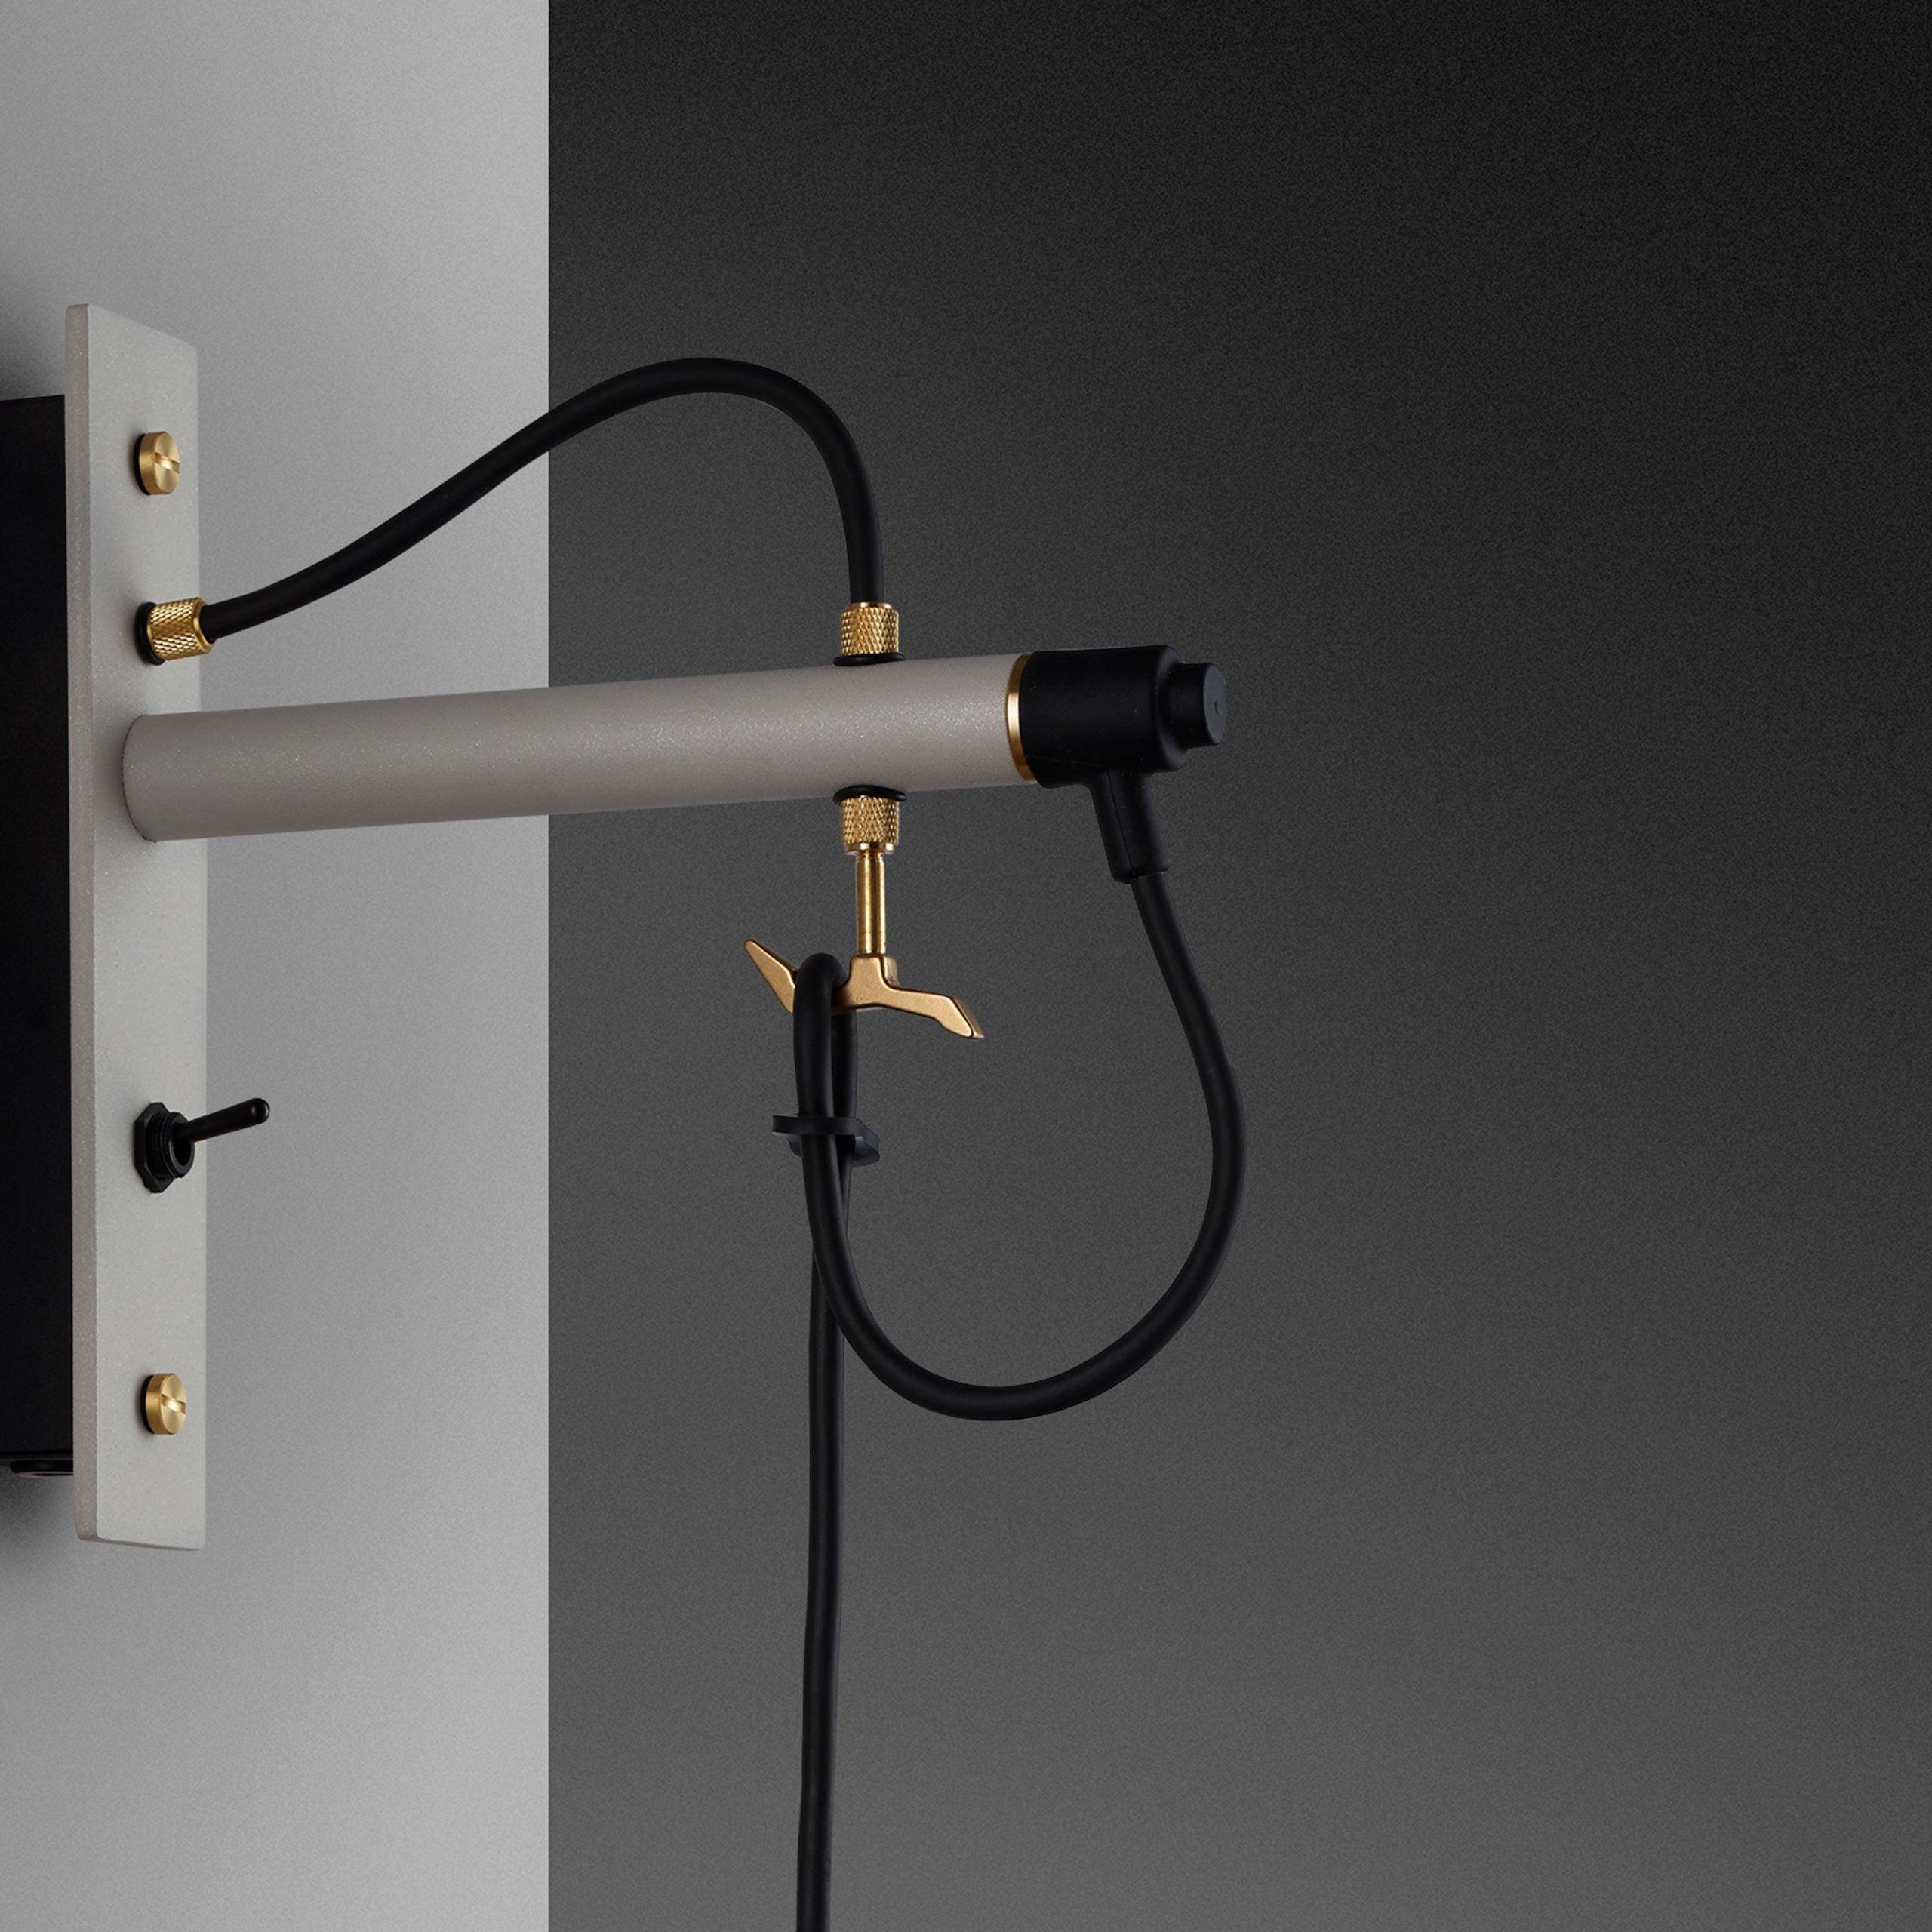 Lampa de perete HOOKED / NUDE / STONE - Buster & Punch - PARIS14A.RO